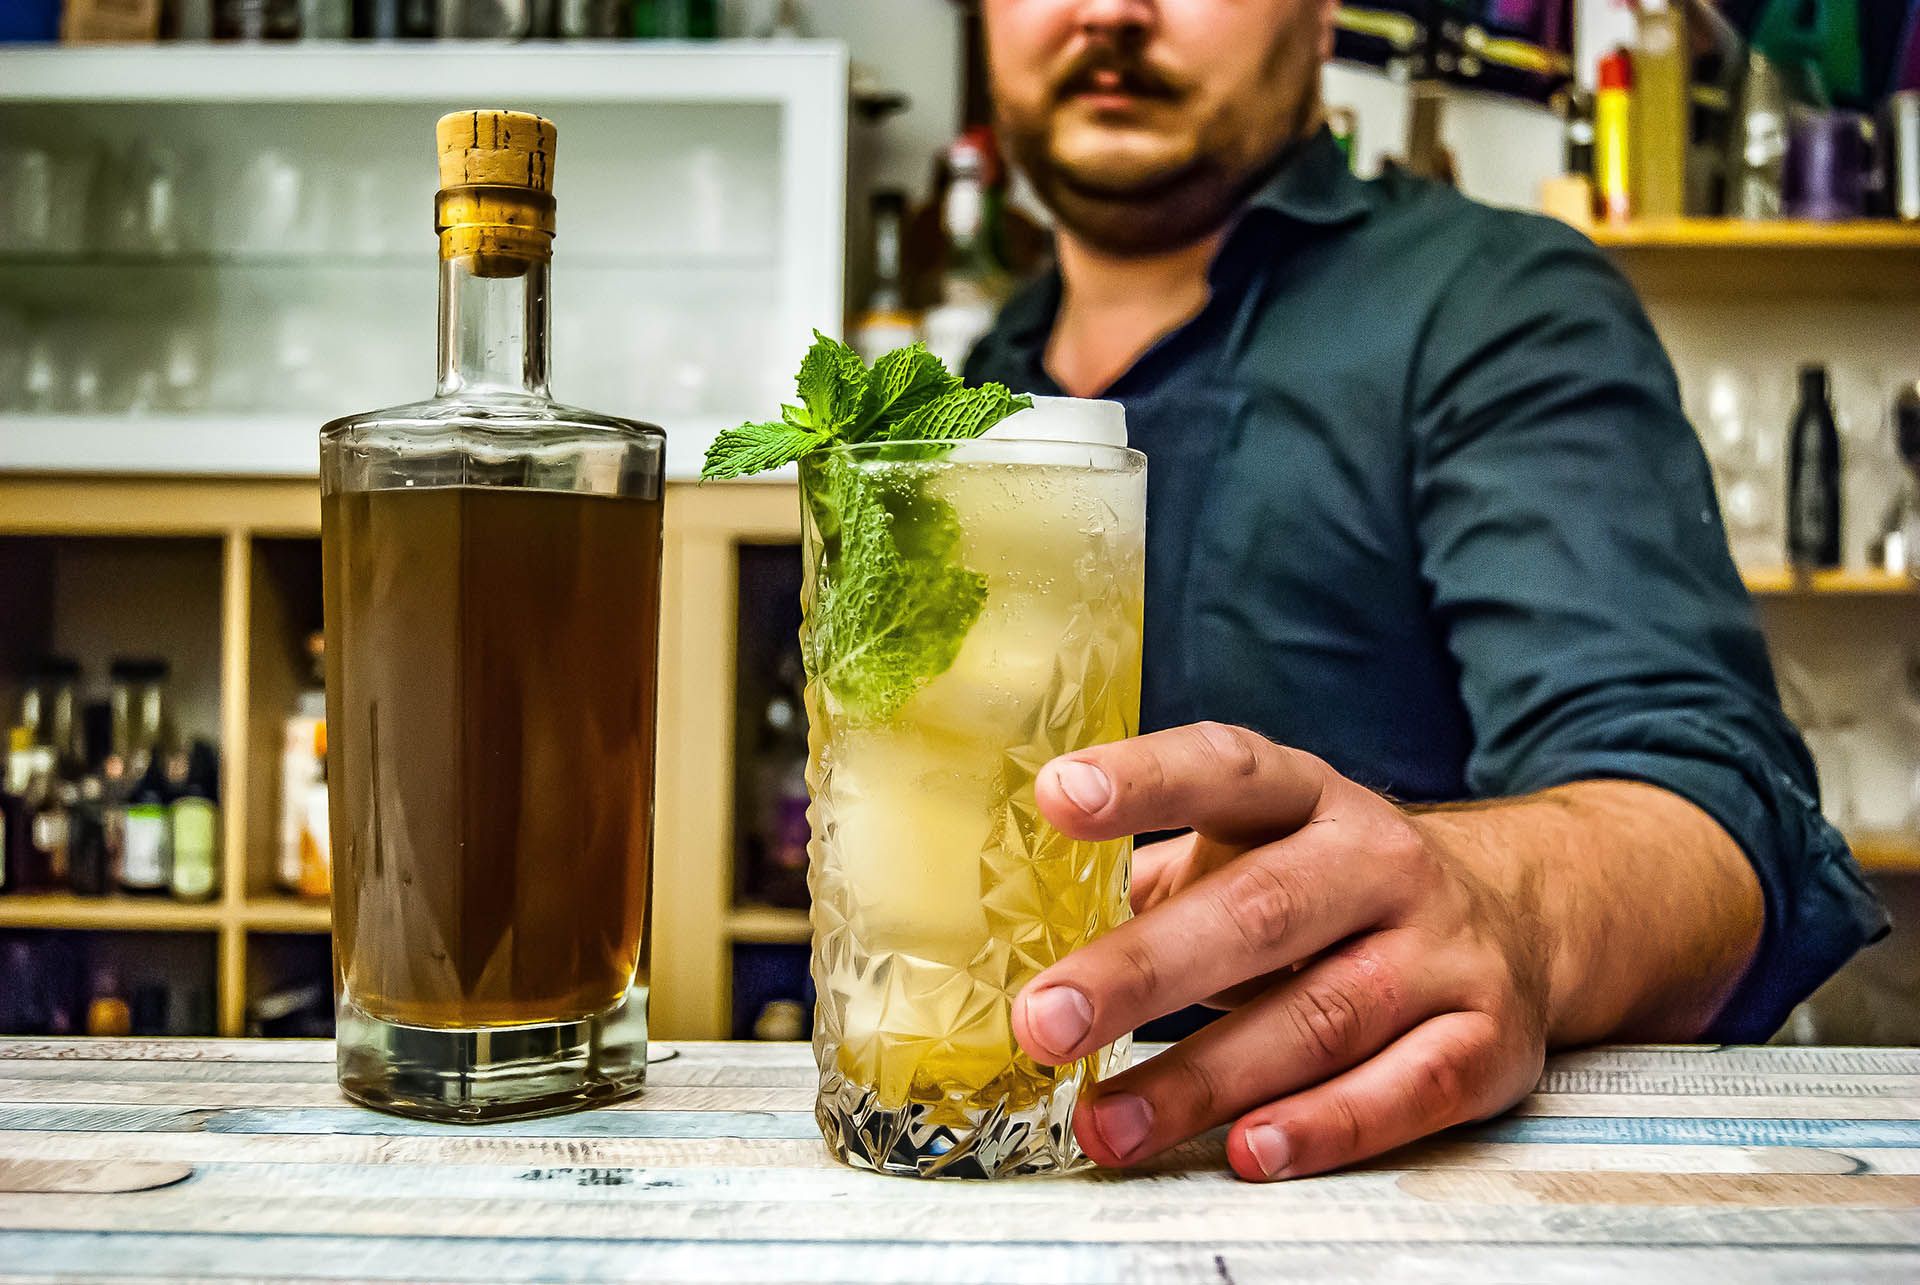 cannabis infused beverages, cannabis beverages, cannabis cocktails, cannabis infused cocktails